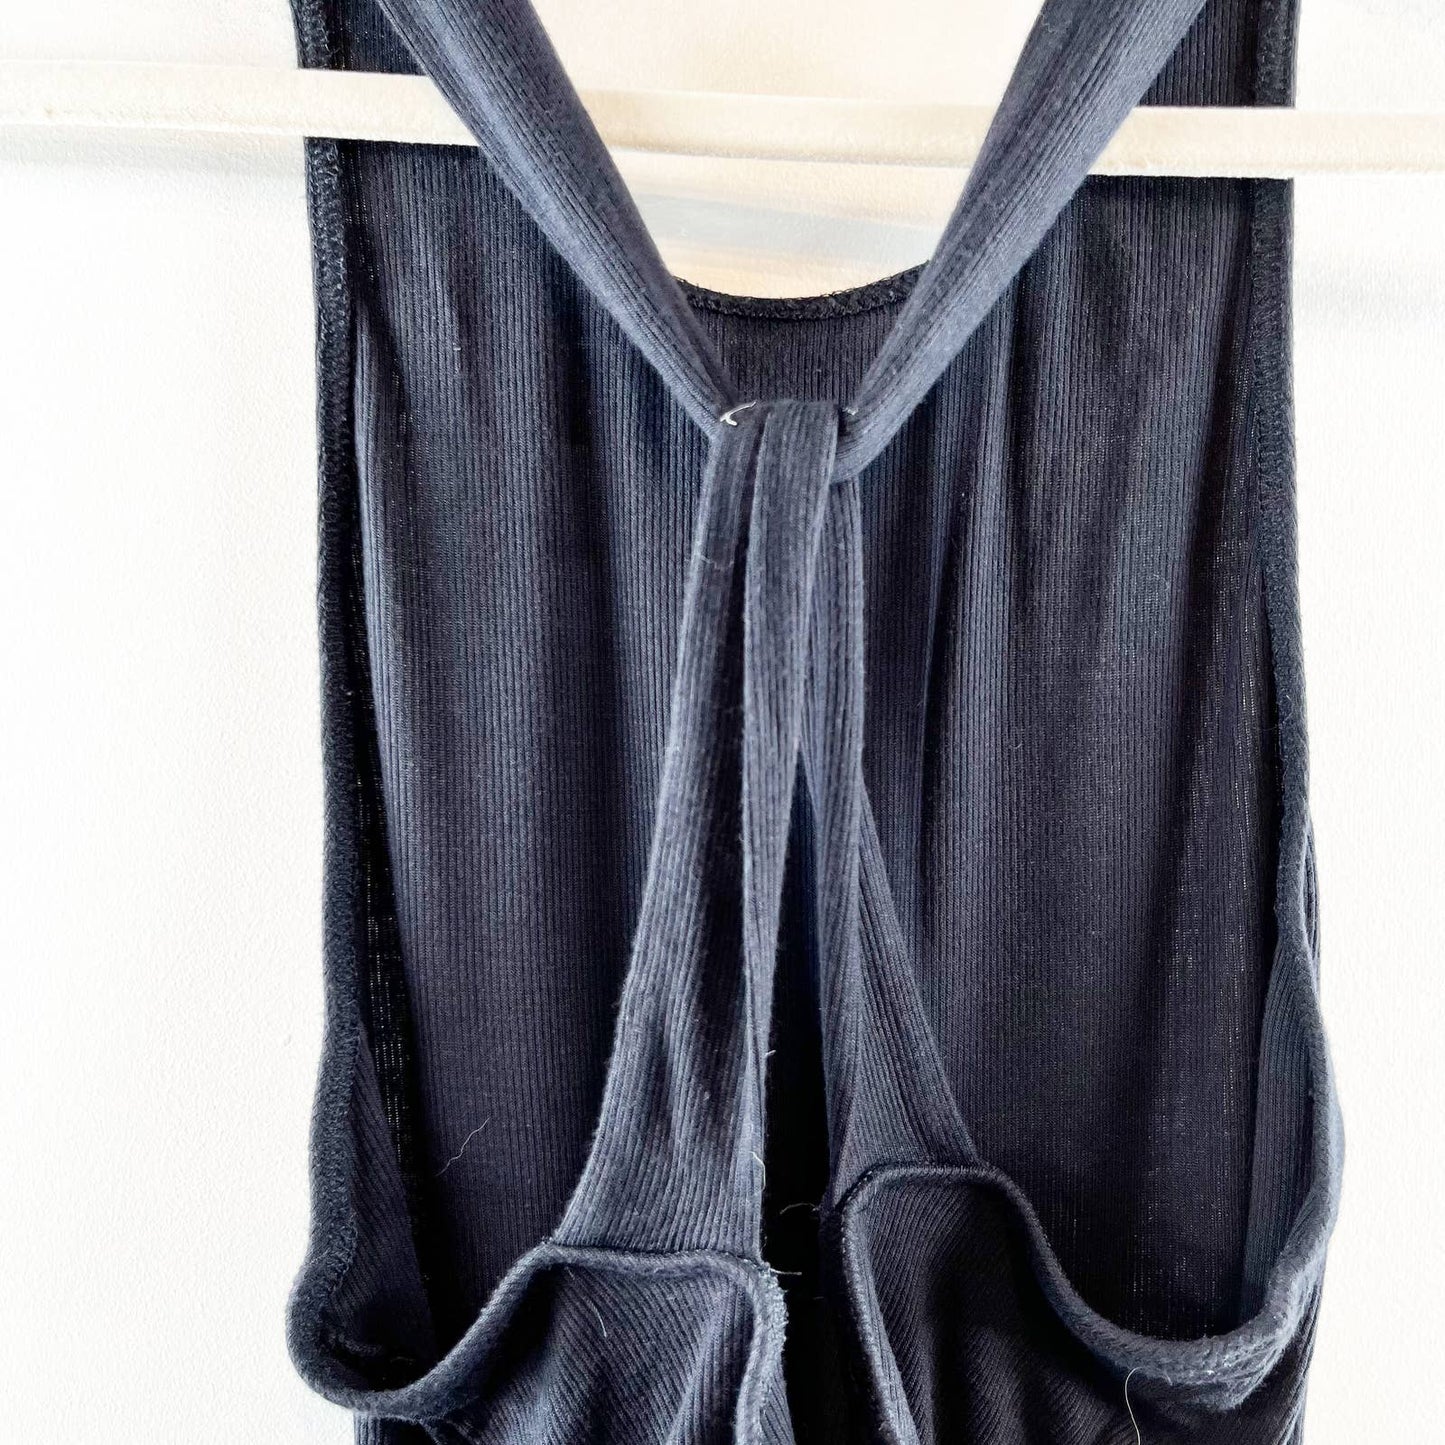 Free People Up and Around Racerback Tank Bodysuit Black Small